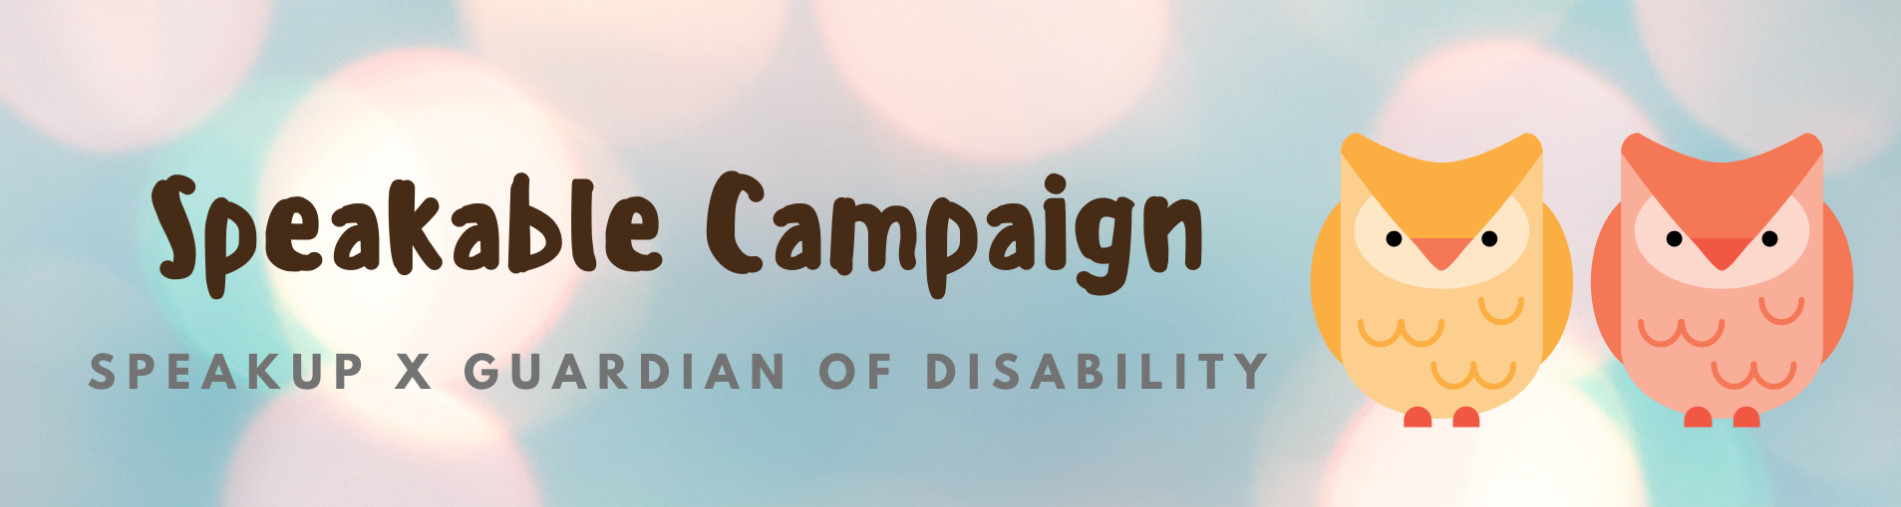 Crowdfunding for Speakable Campaign